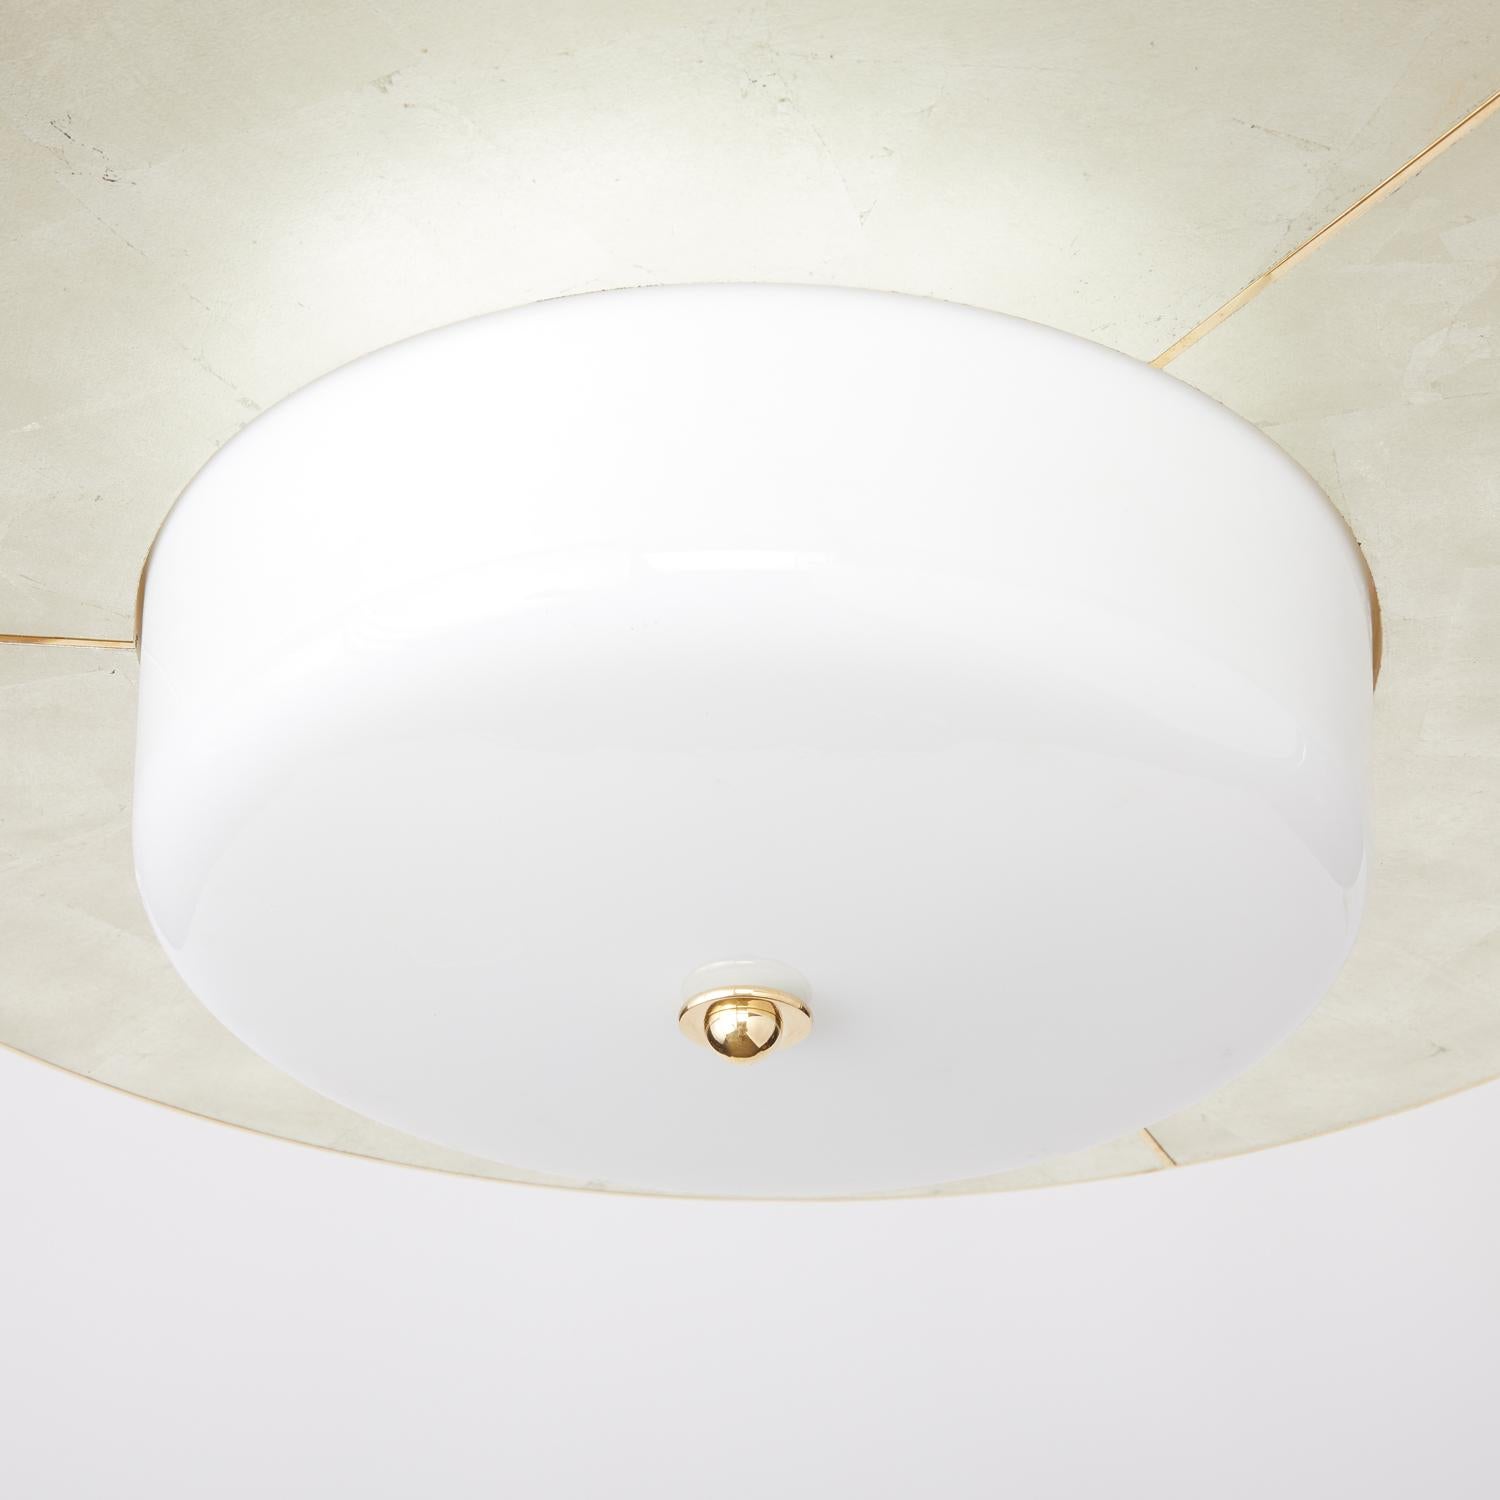 The White Gold Leaf Deco Flush Mount by David Duncan:: New:: with Gold Leaf Frame (en anglais) Neuf - En vente à New York, NY